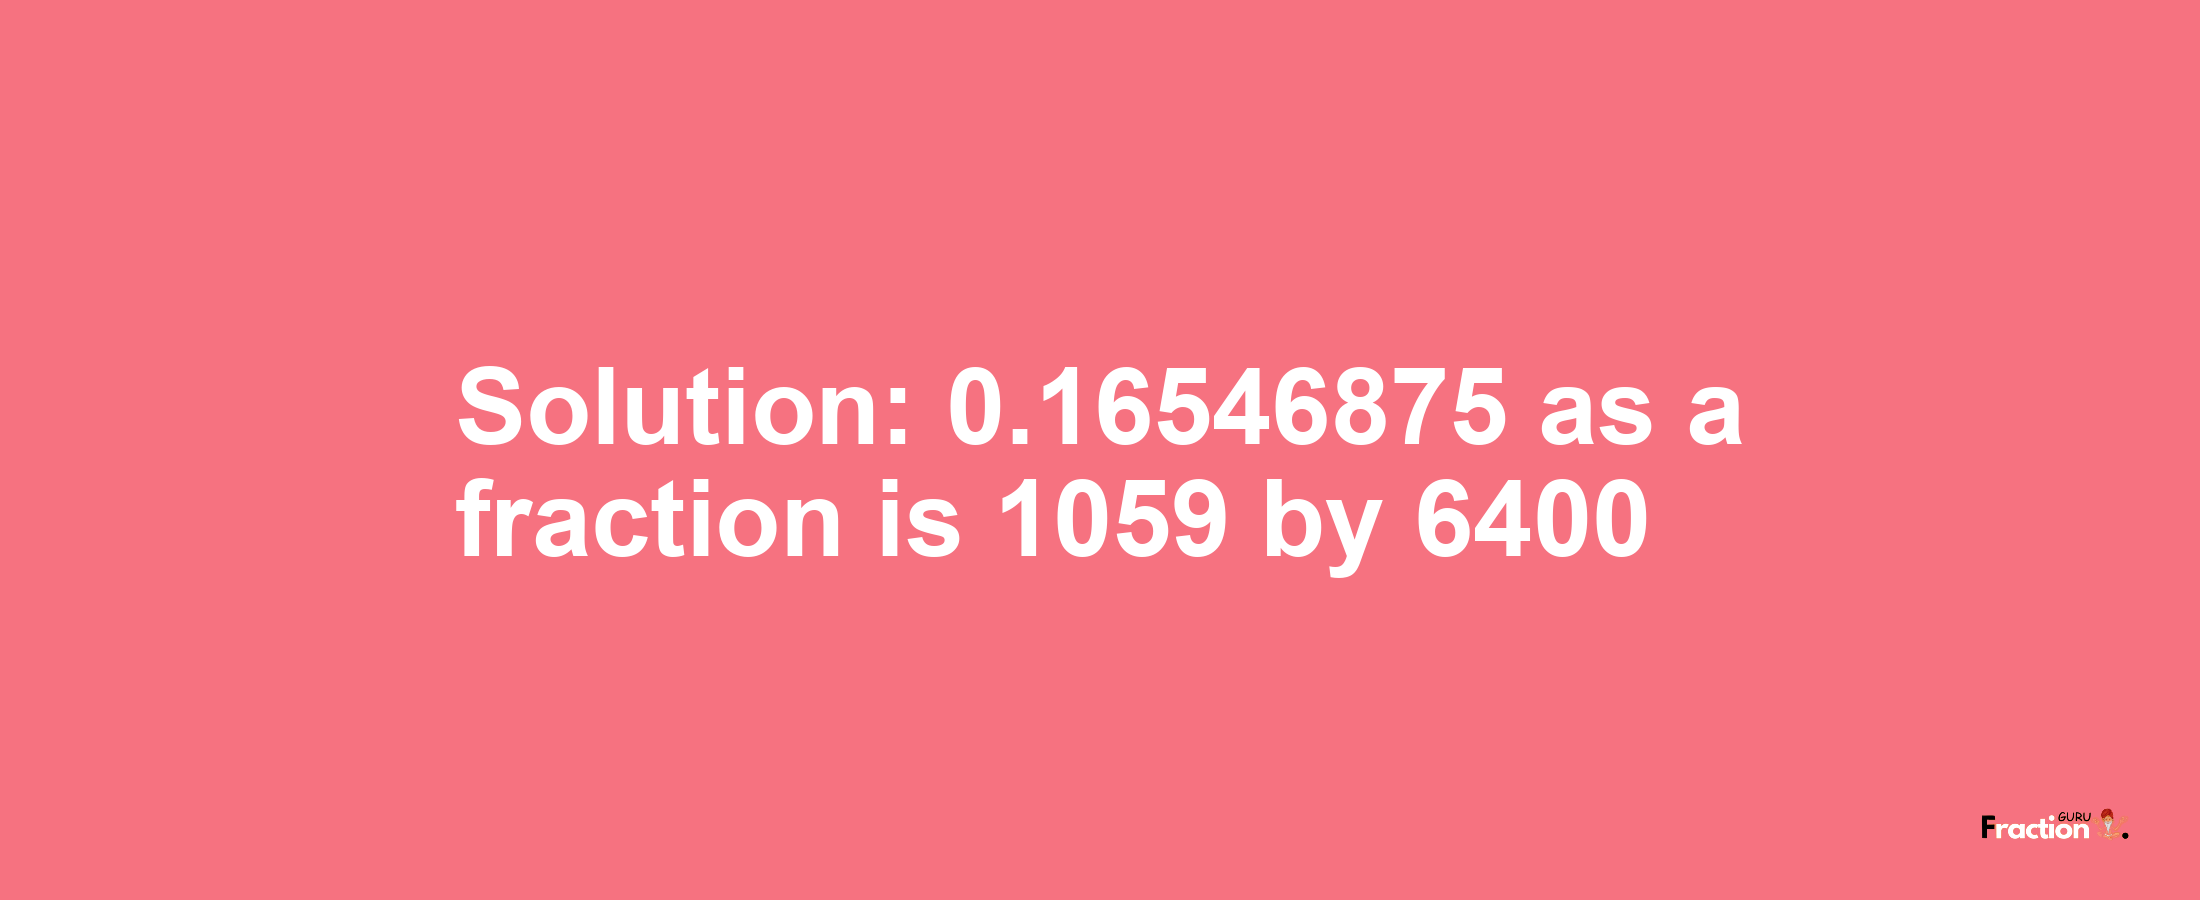 Solution:0.16546875 as a fraction is 1059/6400